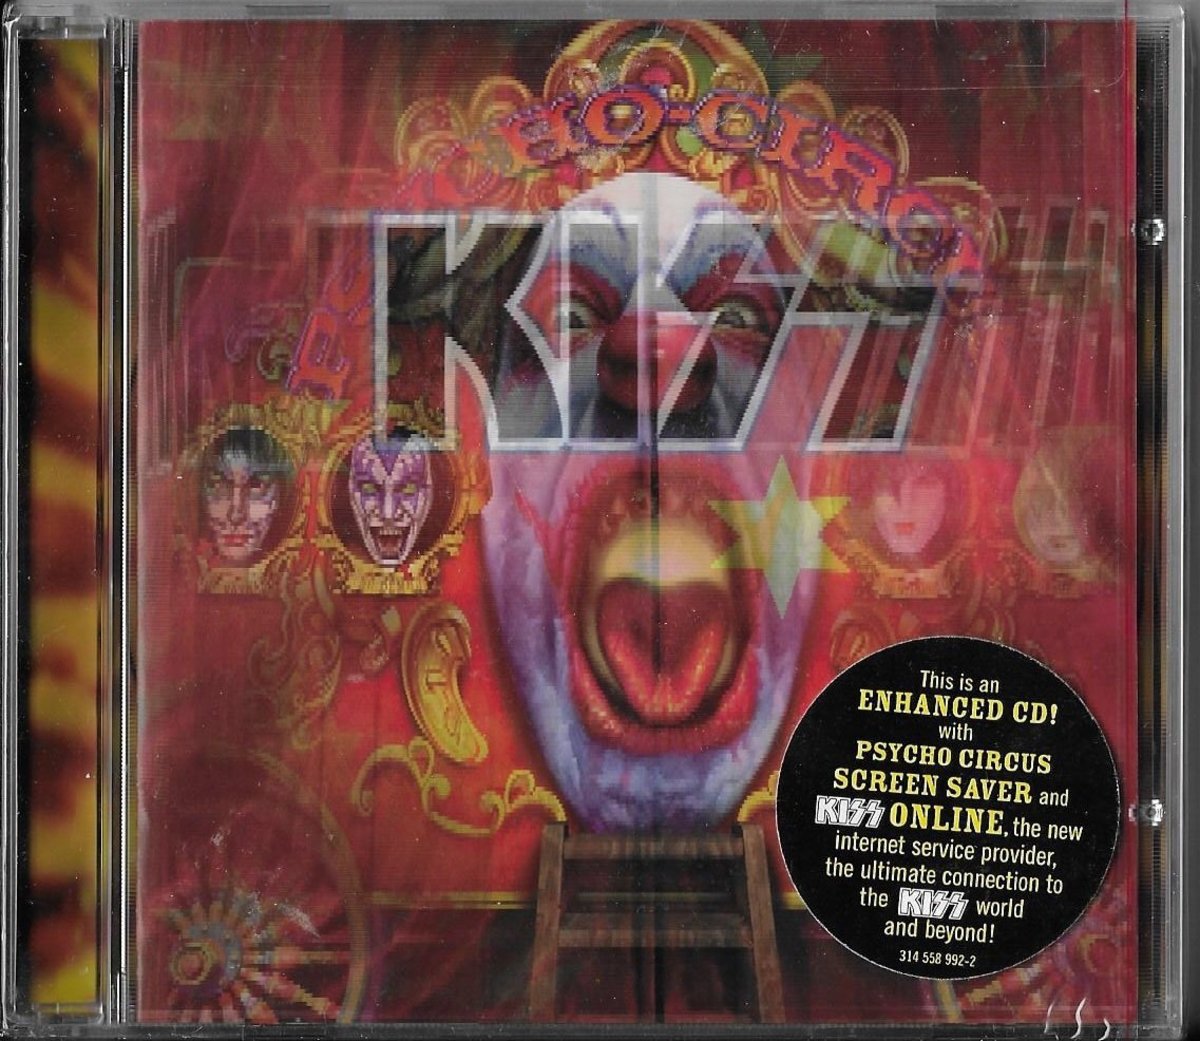 The original CD release had a "lenticular" album cover and offered a screen saver (!) and access to KISS' then-new online service 